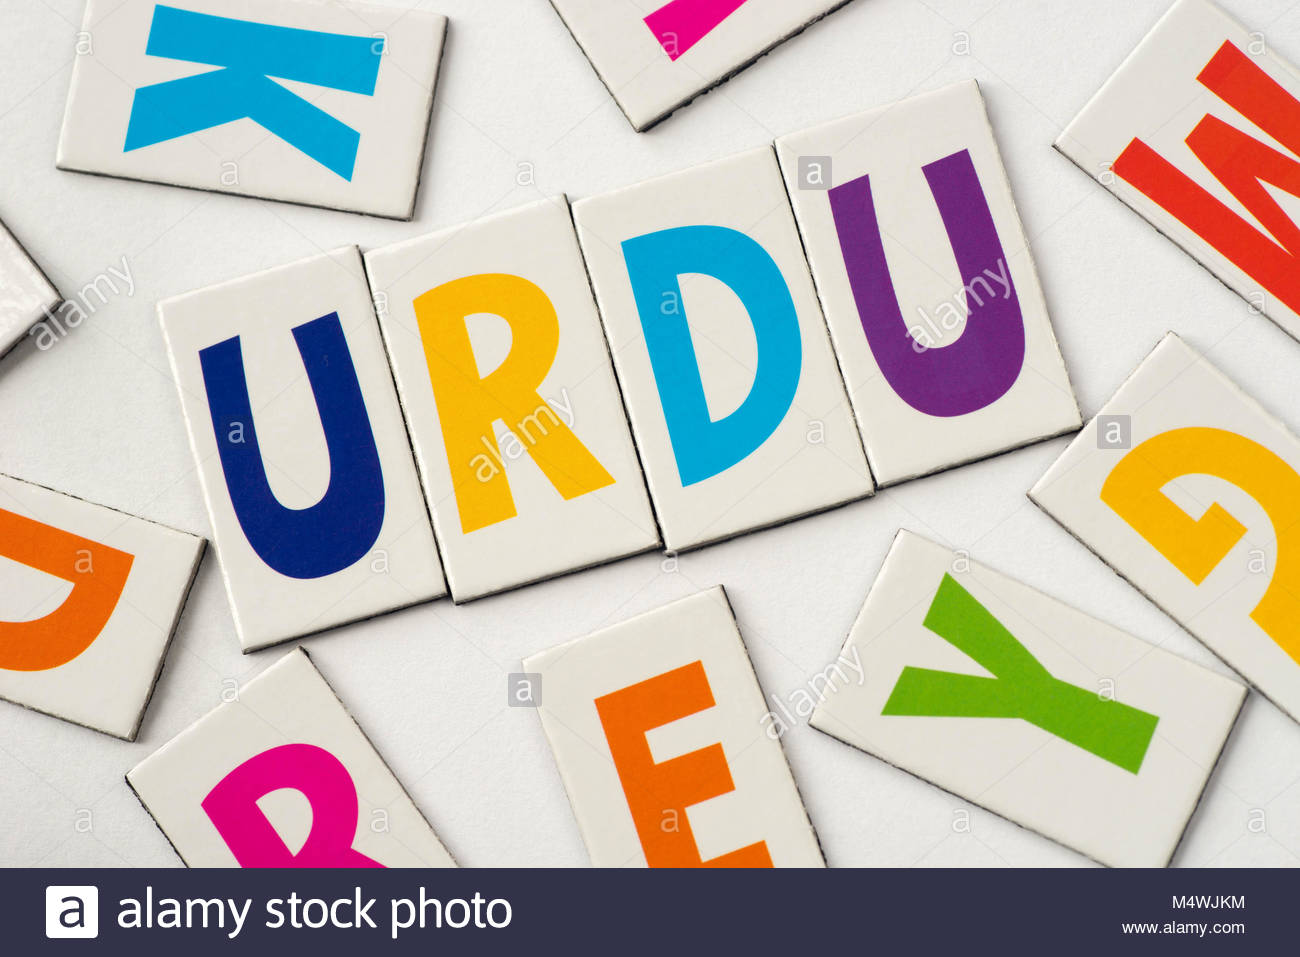 Word Urdu Made Of Colorful Letters On White Background Stock Photo